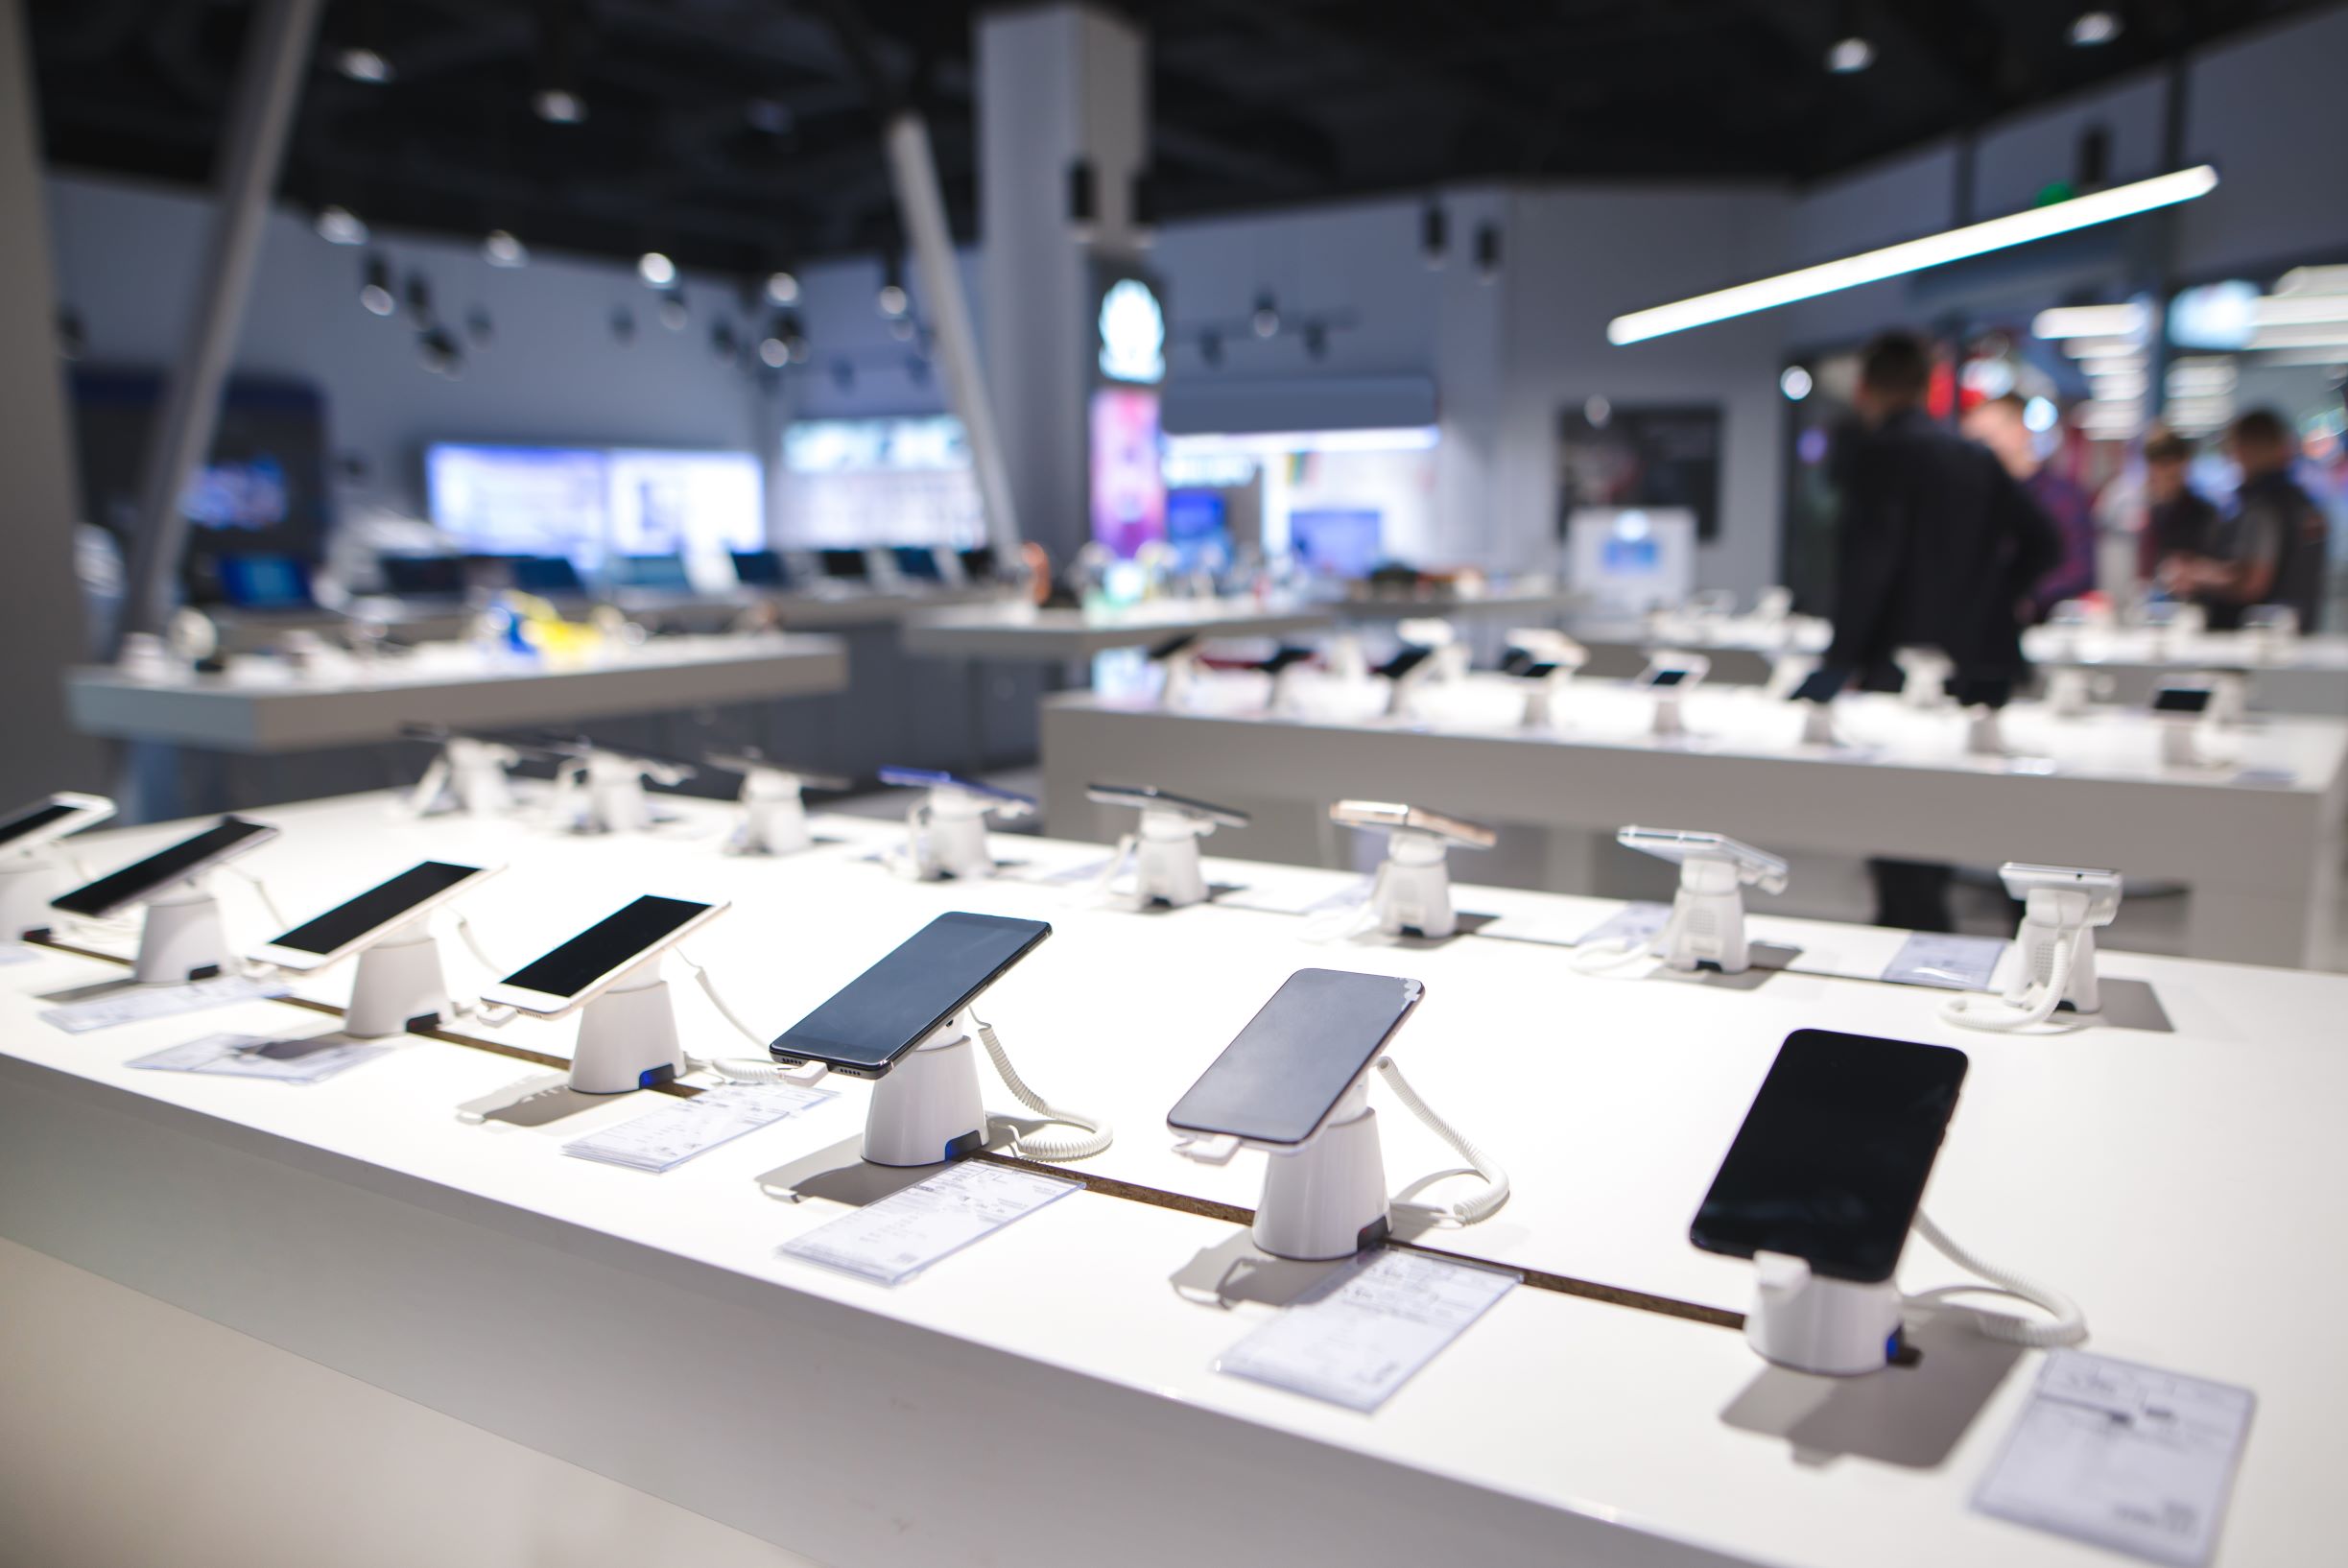 Mobile phones lined up on display at a mobile phone store